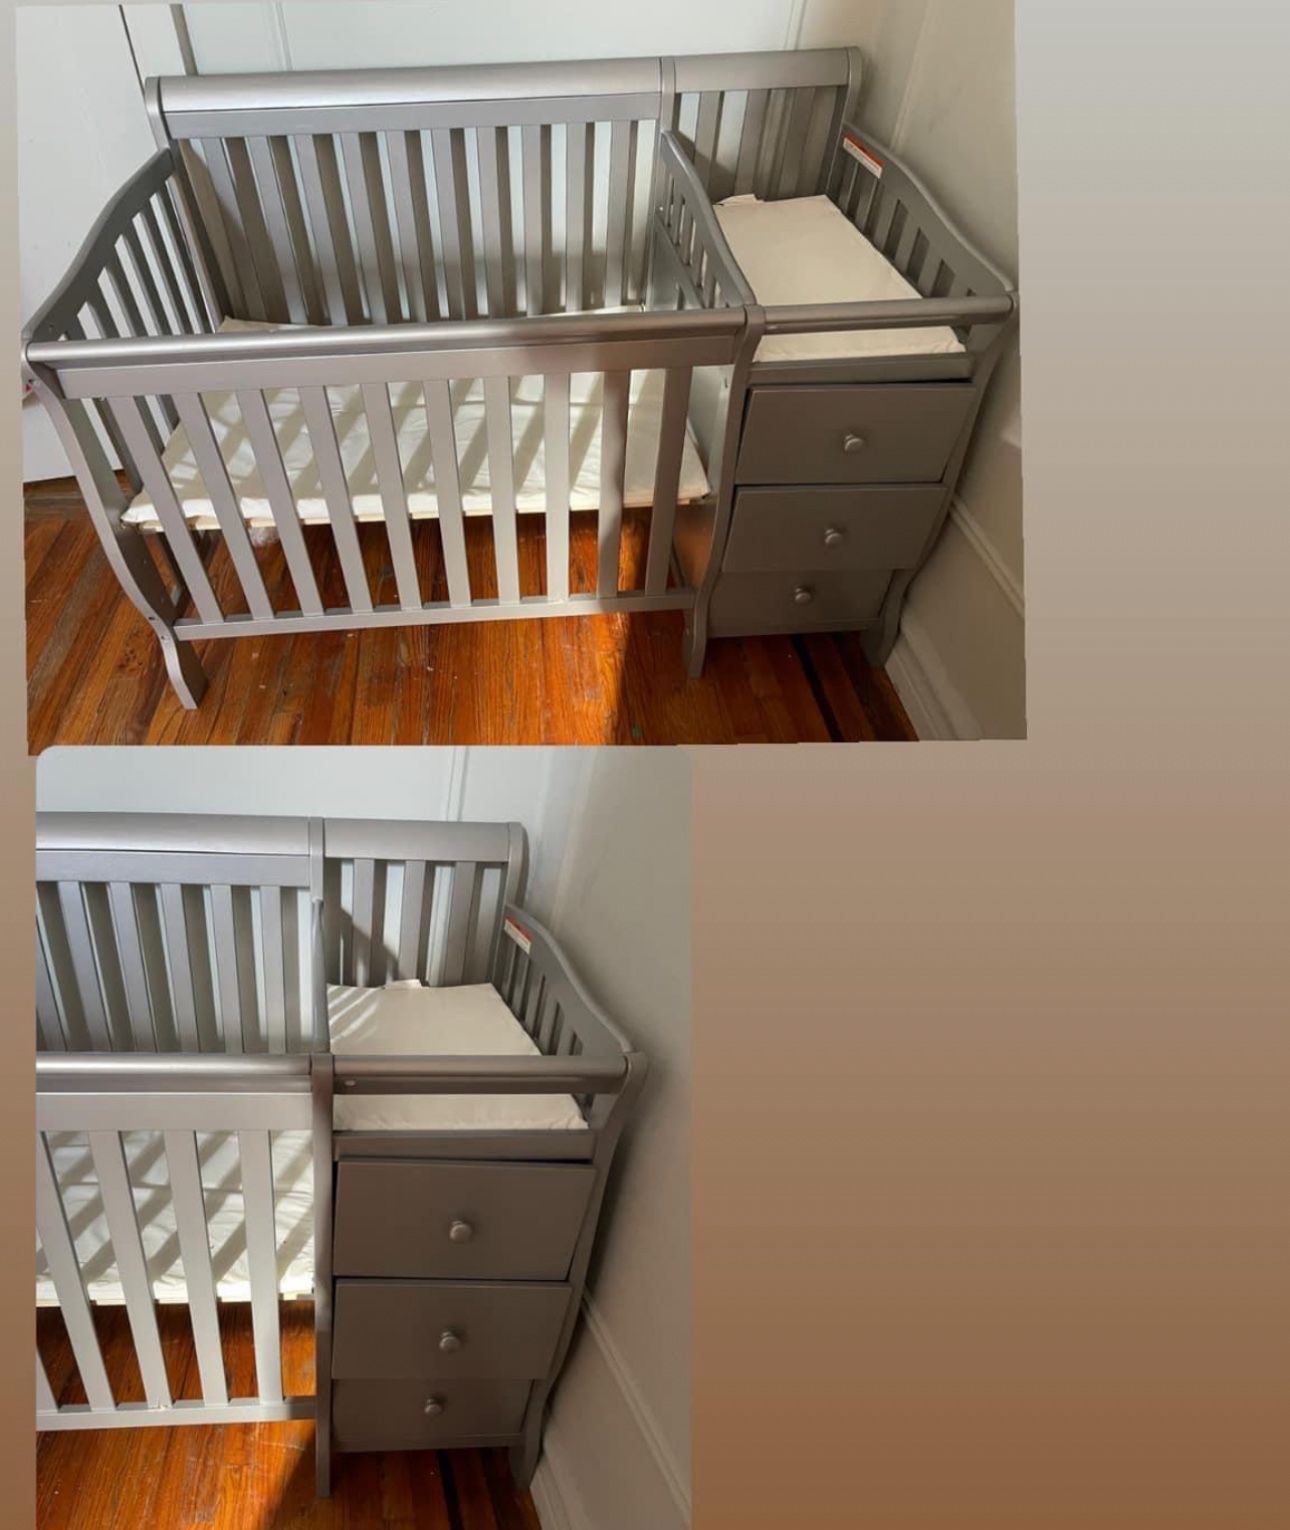 Crib for baby 